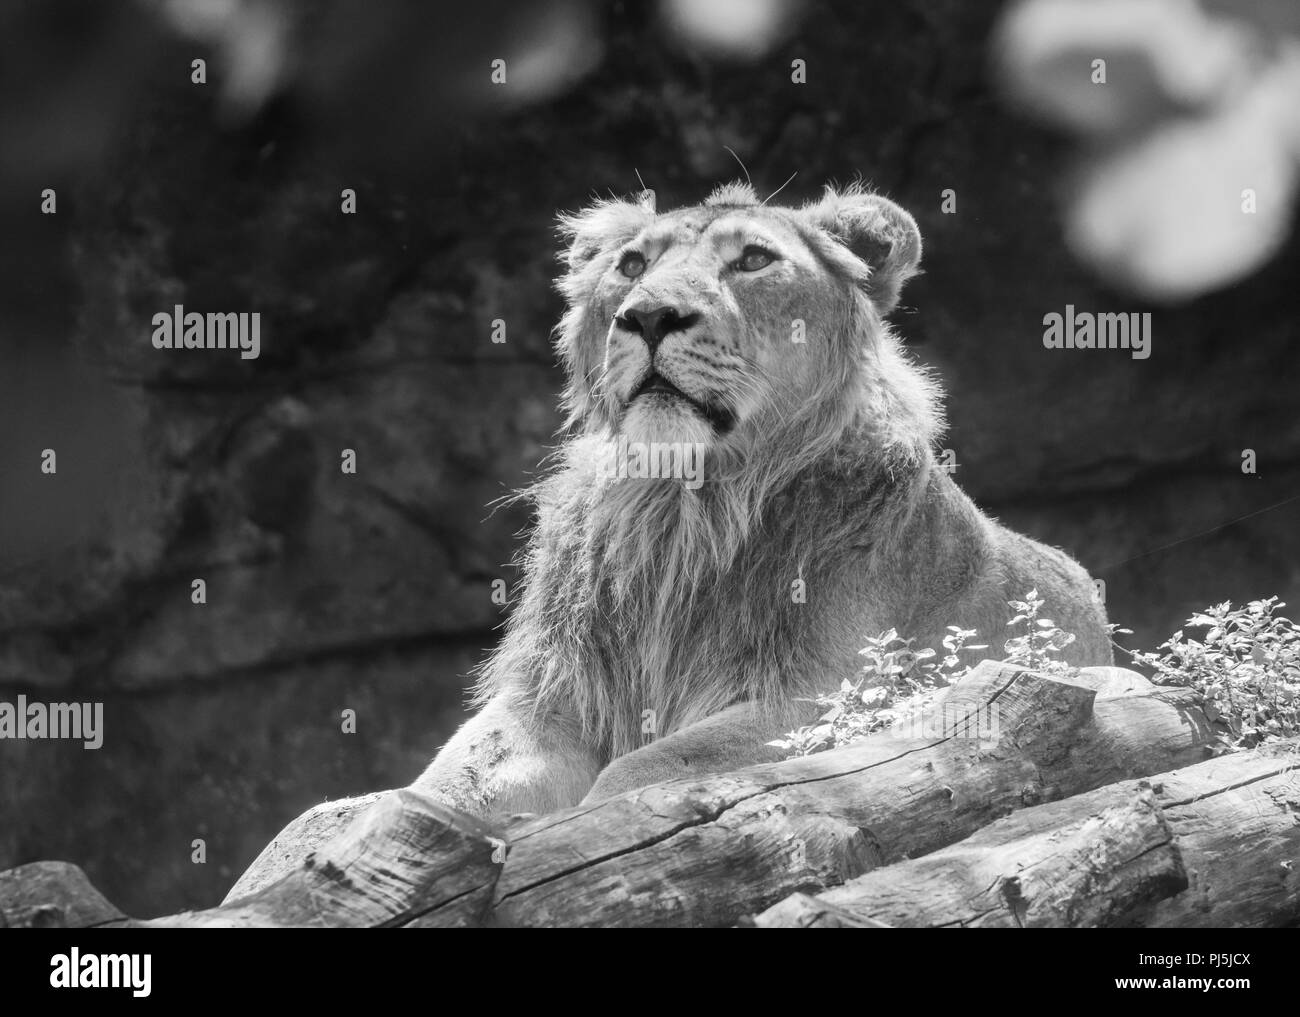 Rome, Italy - The animals of Biopark, a zoological park in the heart of Rome in Villa Borghese. Stock Photo